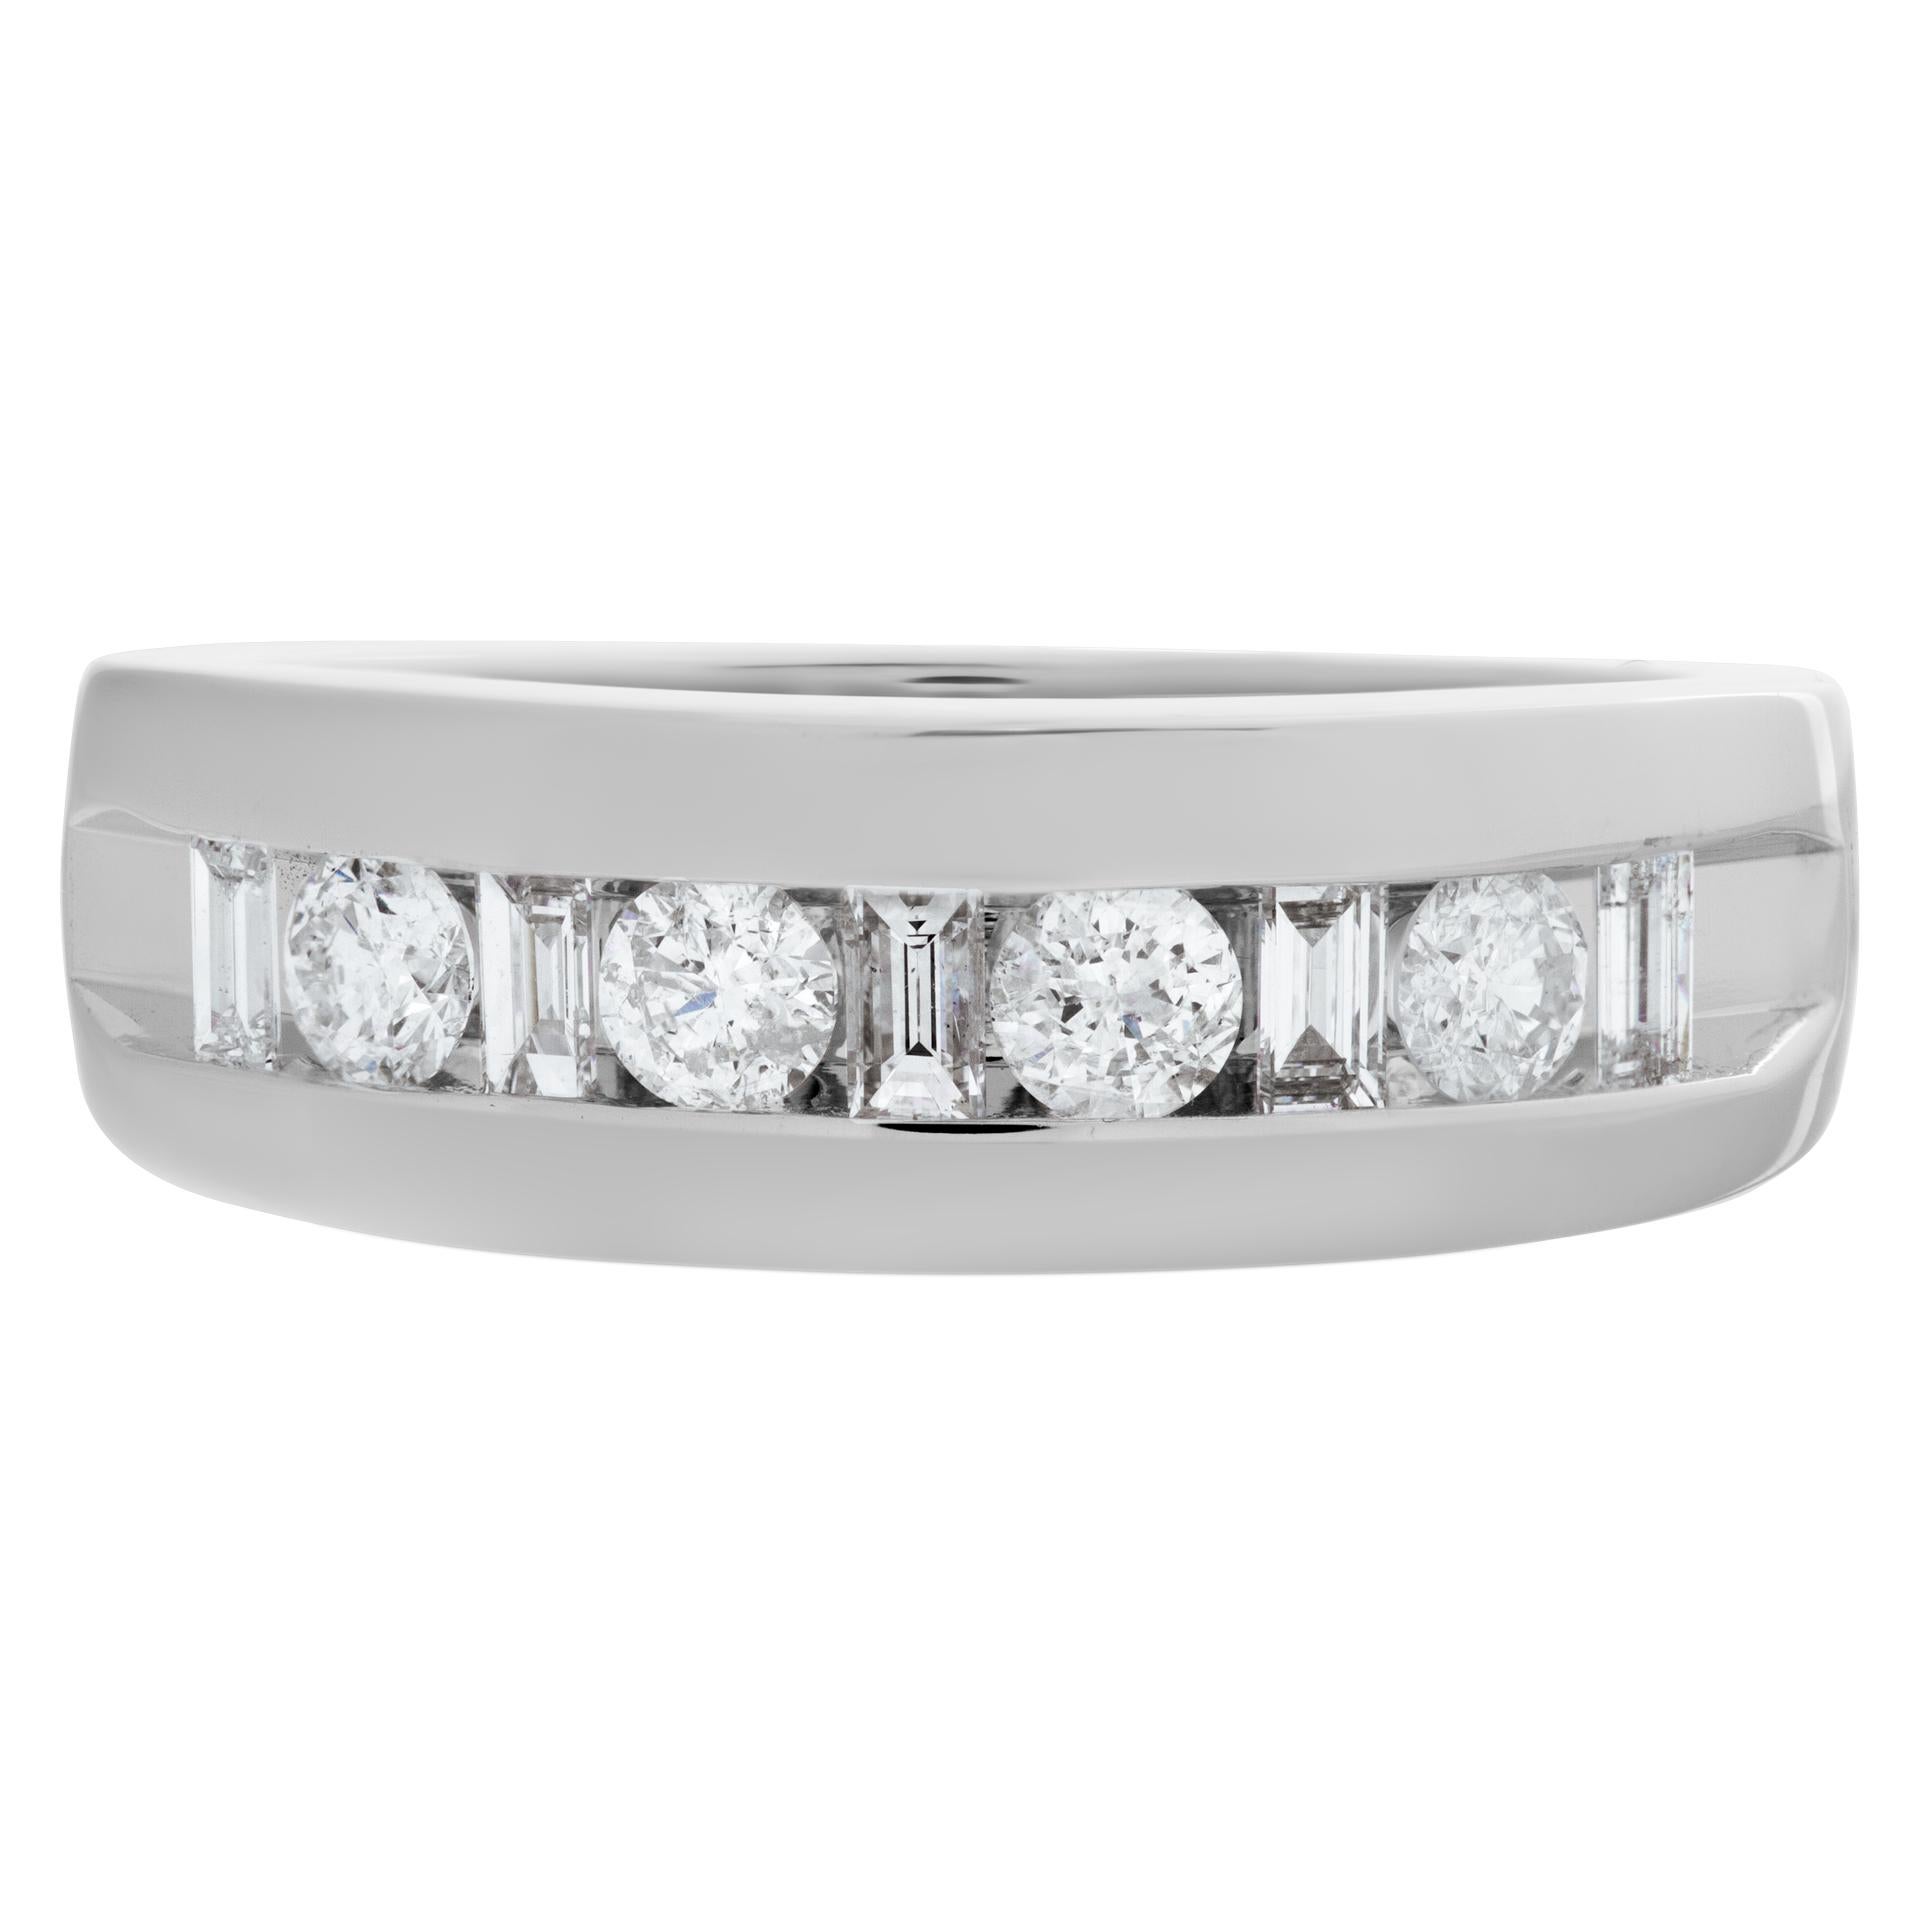 Semi eternity diamond ring in 14k white gold with approximately 0.53 carats in round and baguette diamonds. Size 6This Diamond ring is currently size 6 and some items can be sized up or down, please ask! It weighs 4.1 pennyweights and is 14k White